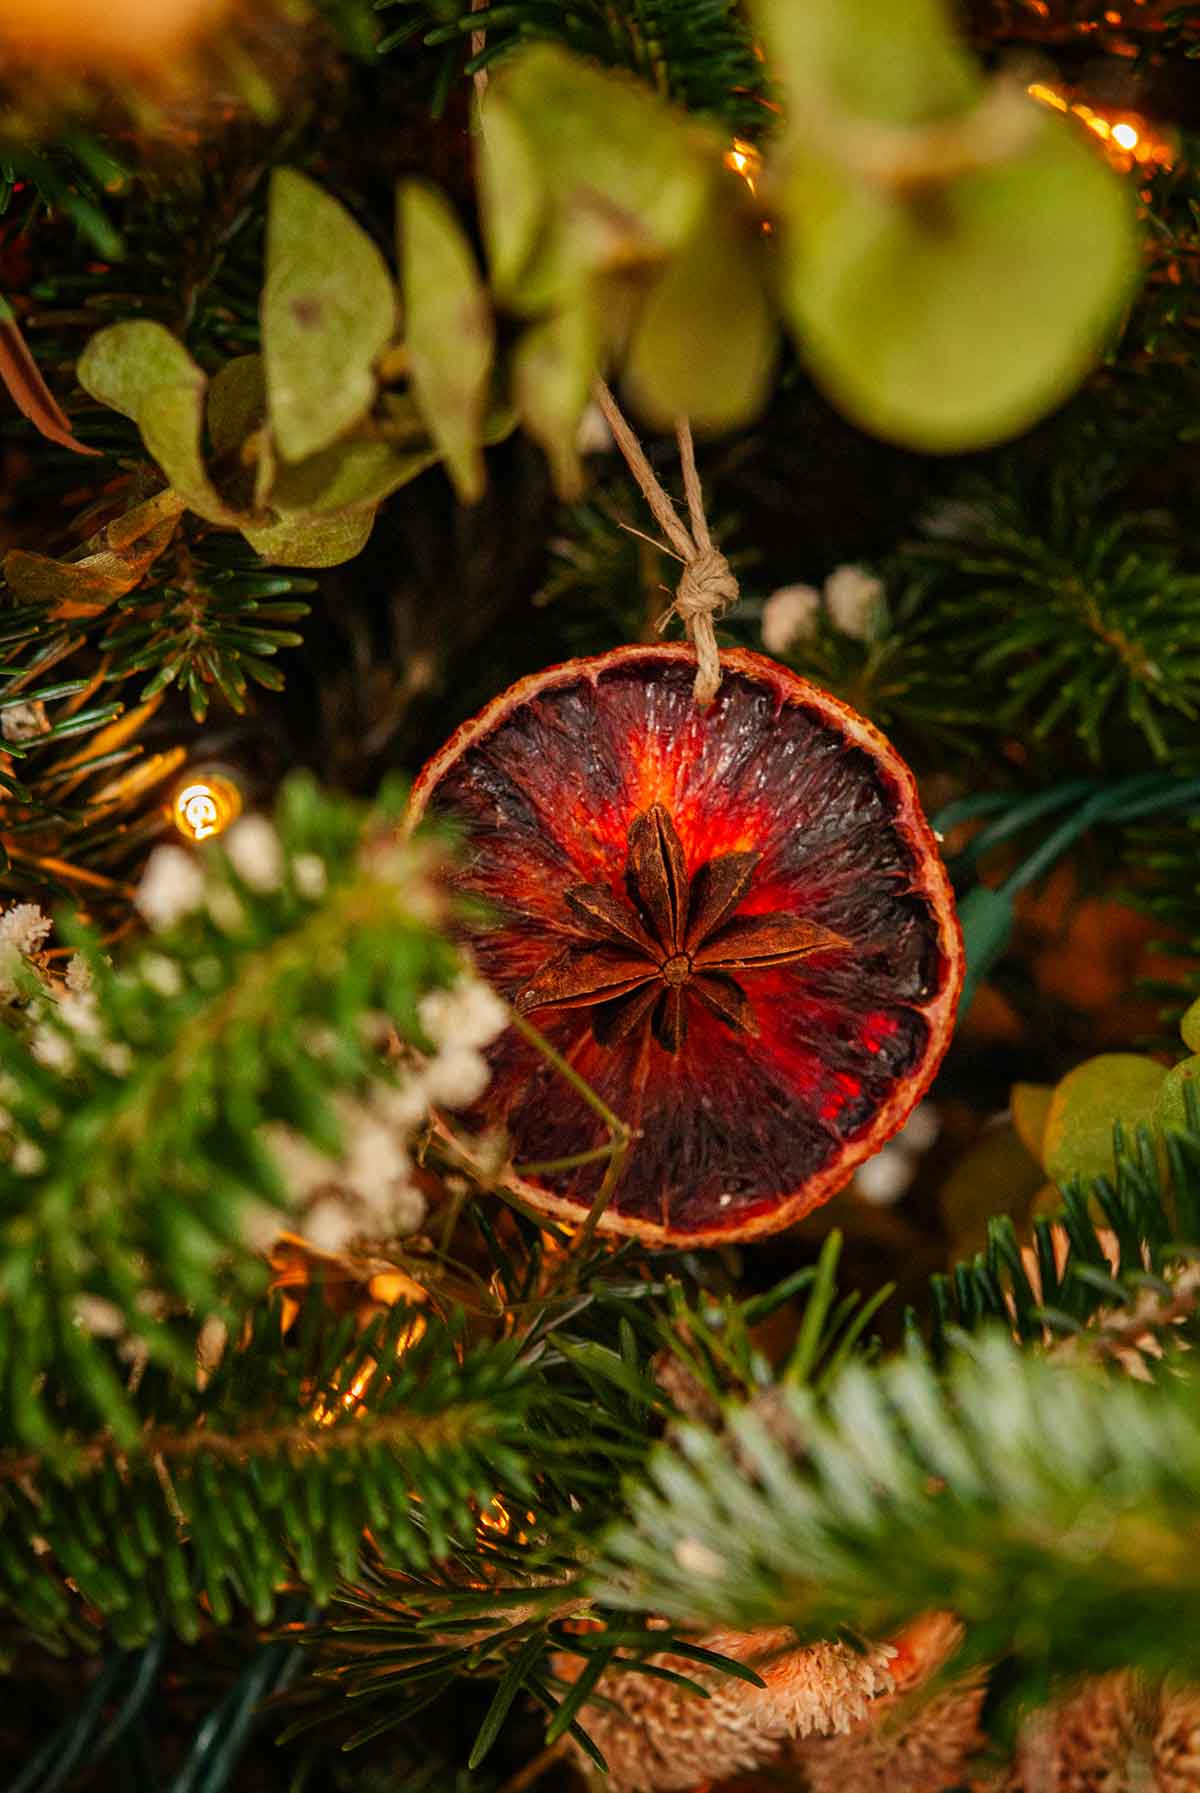 A dry blood orange ornament in a Christmas tree.